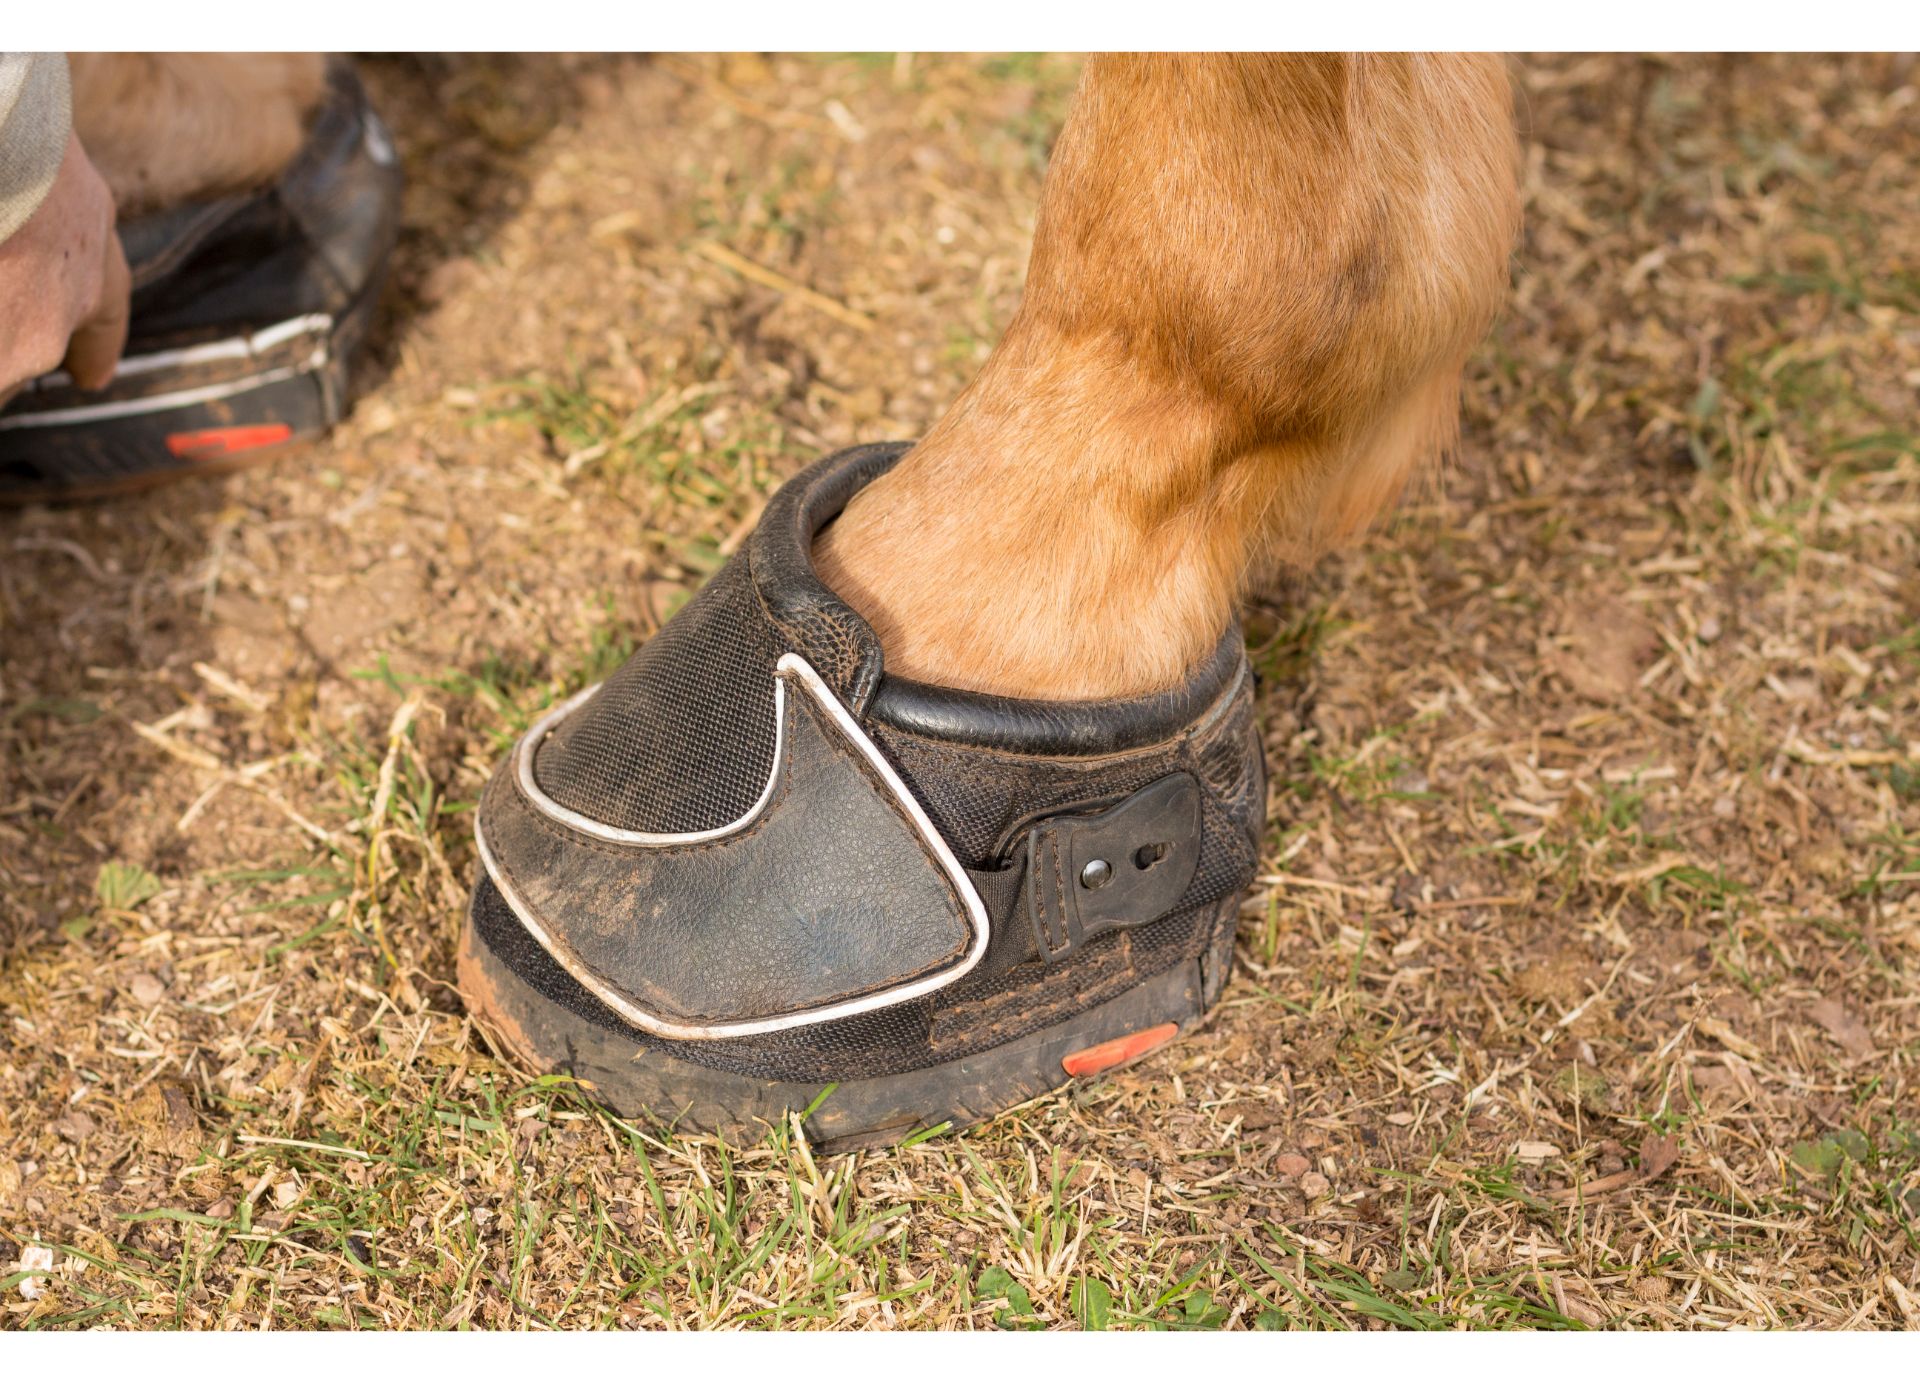 Hoof Boots Can Protect Barefoot Horses